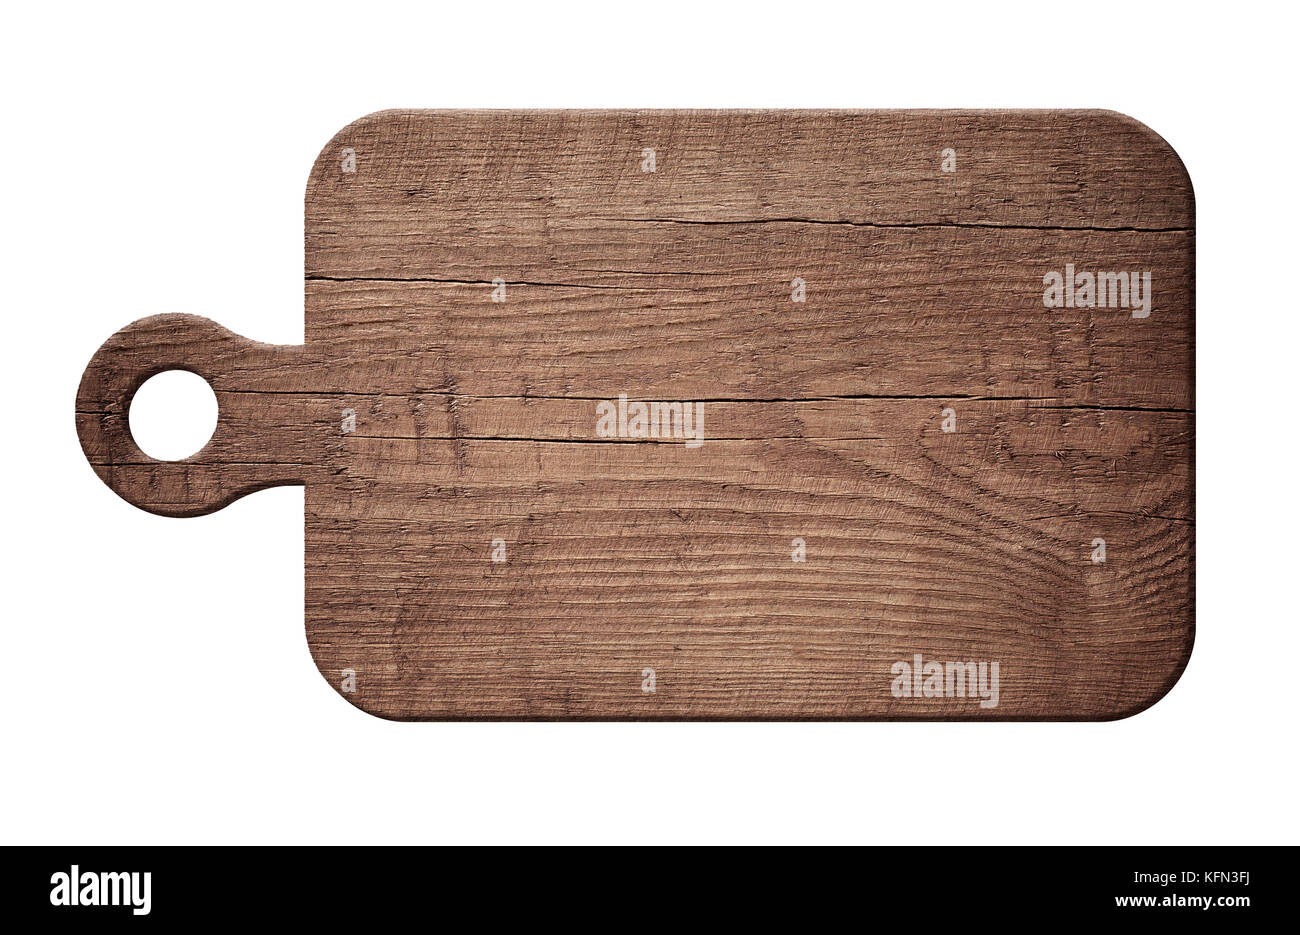 Brown scratched wooden cutting, choping board on white background. Stock Photo